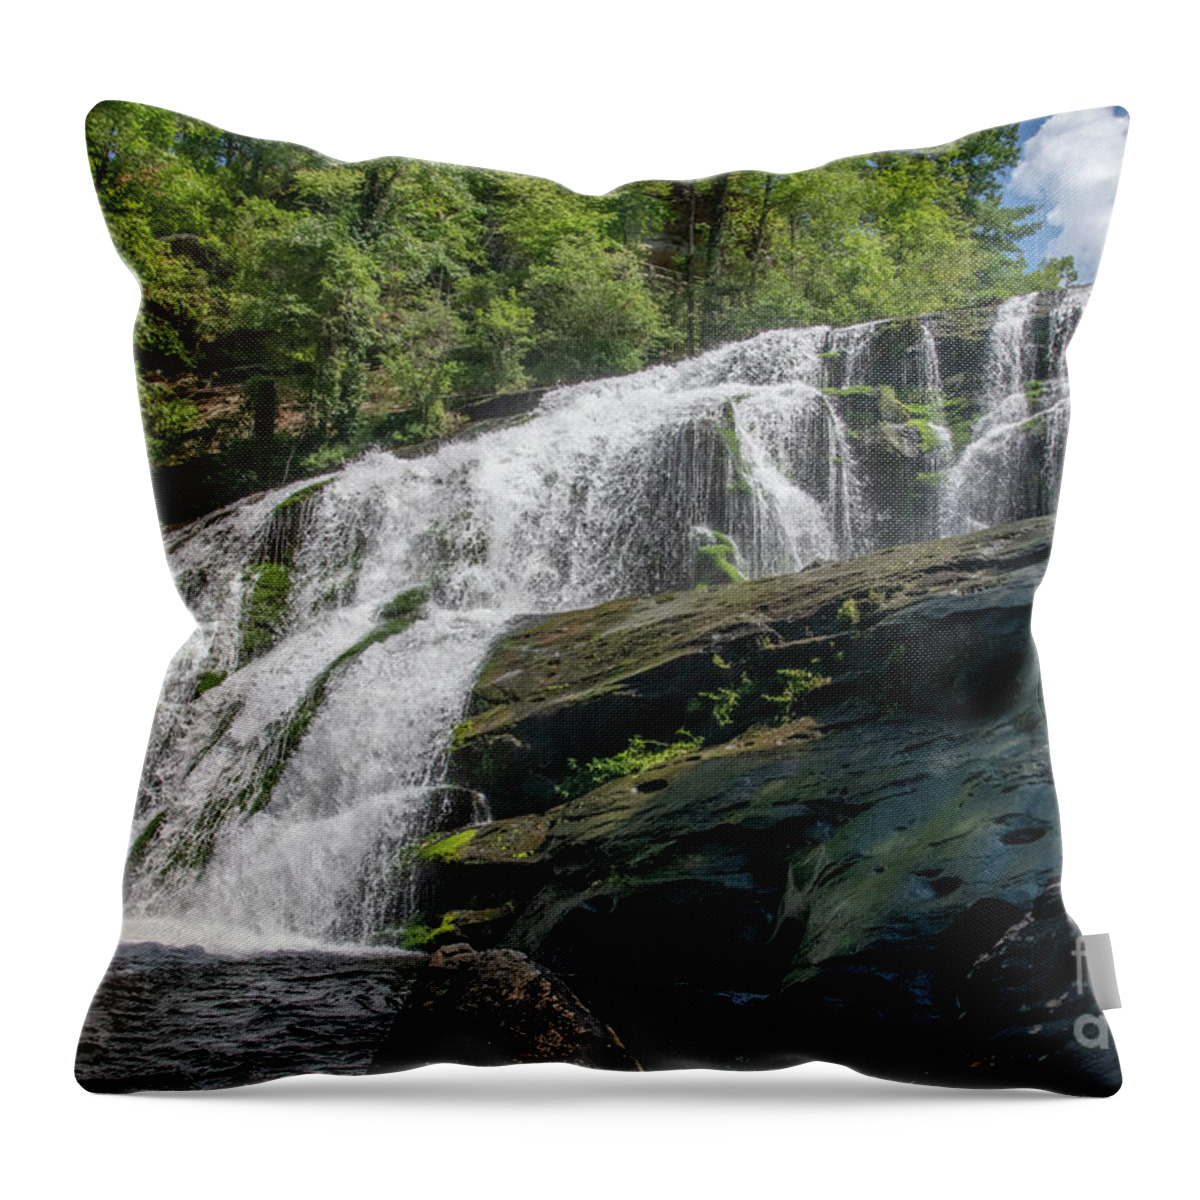 3681 Throw Pillow featuring the photograph Bald River Falls by FineArtRoyal Joshua Mimbs